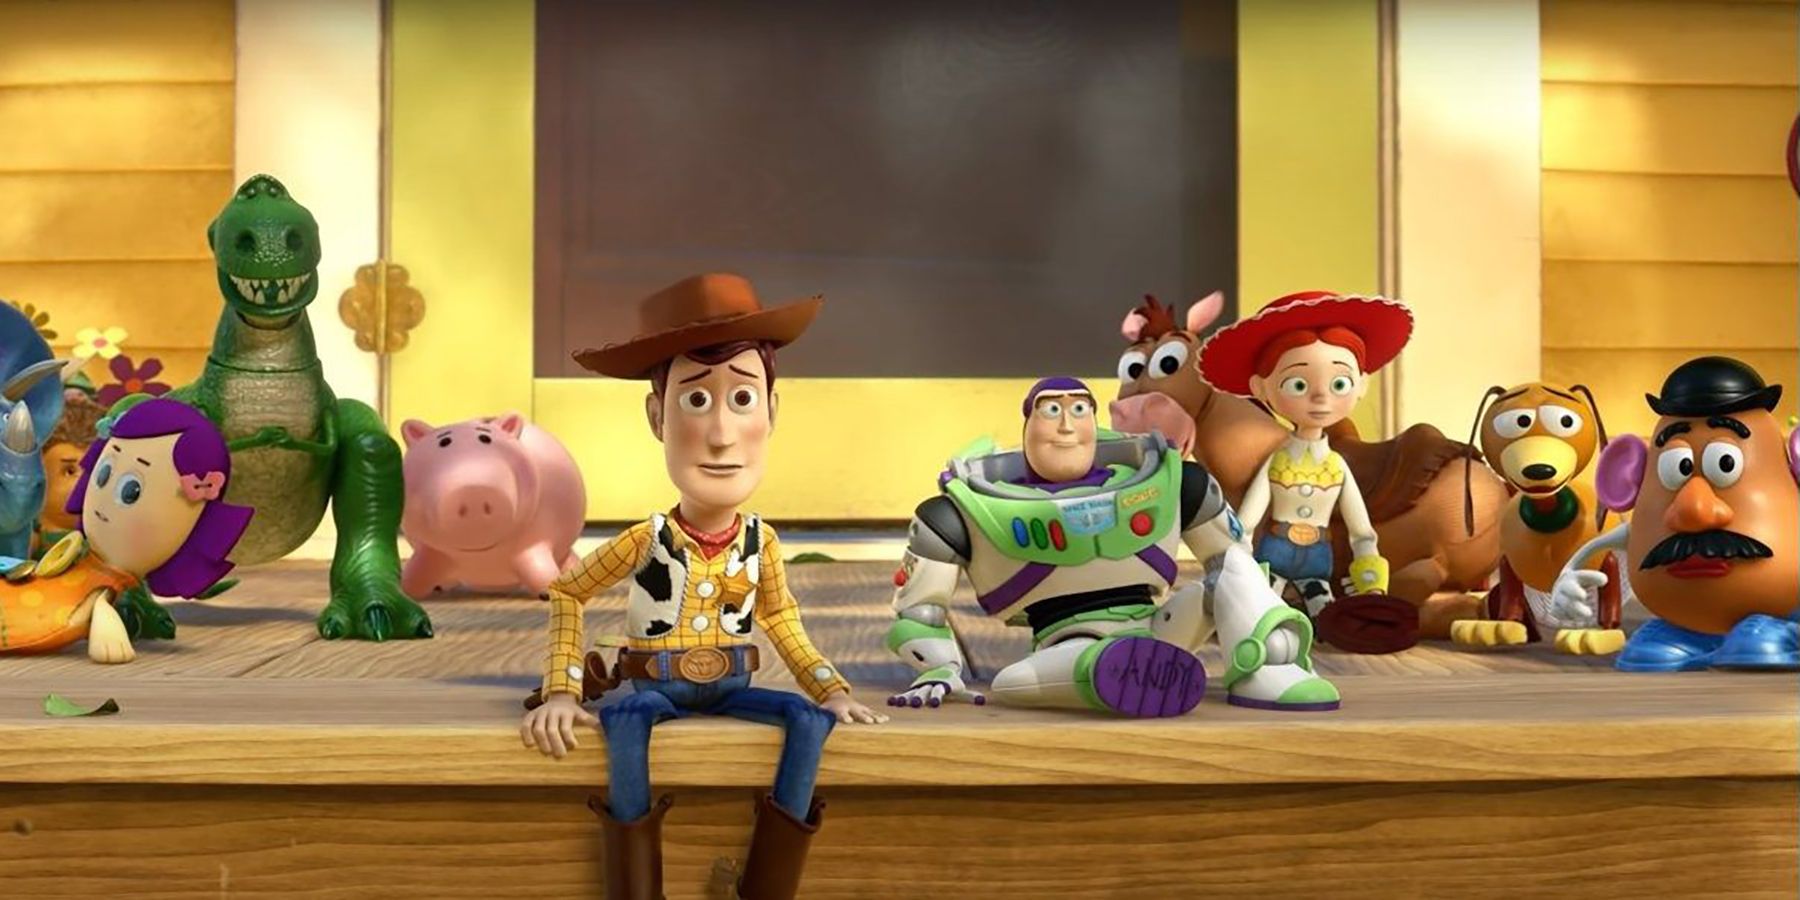 The ending scene from the movie "Toy Story 3", with all of Andy's toys sitting on the porch.